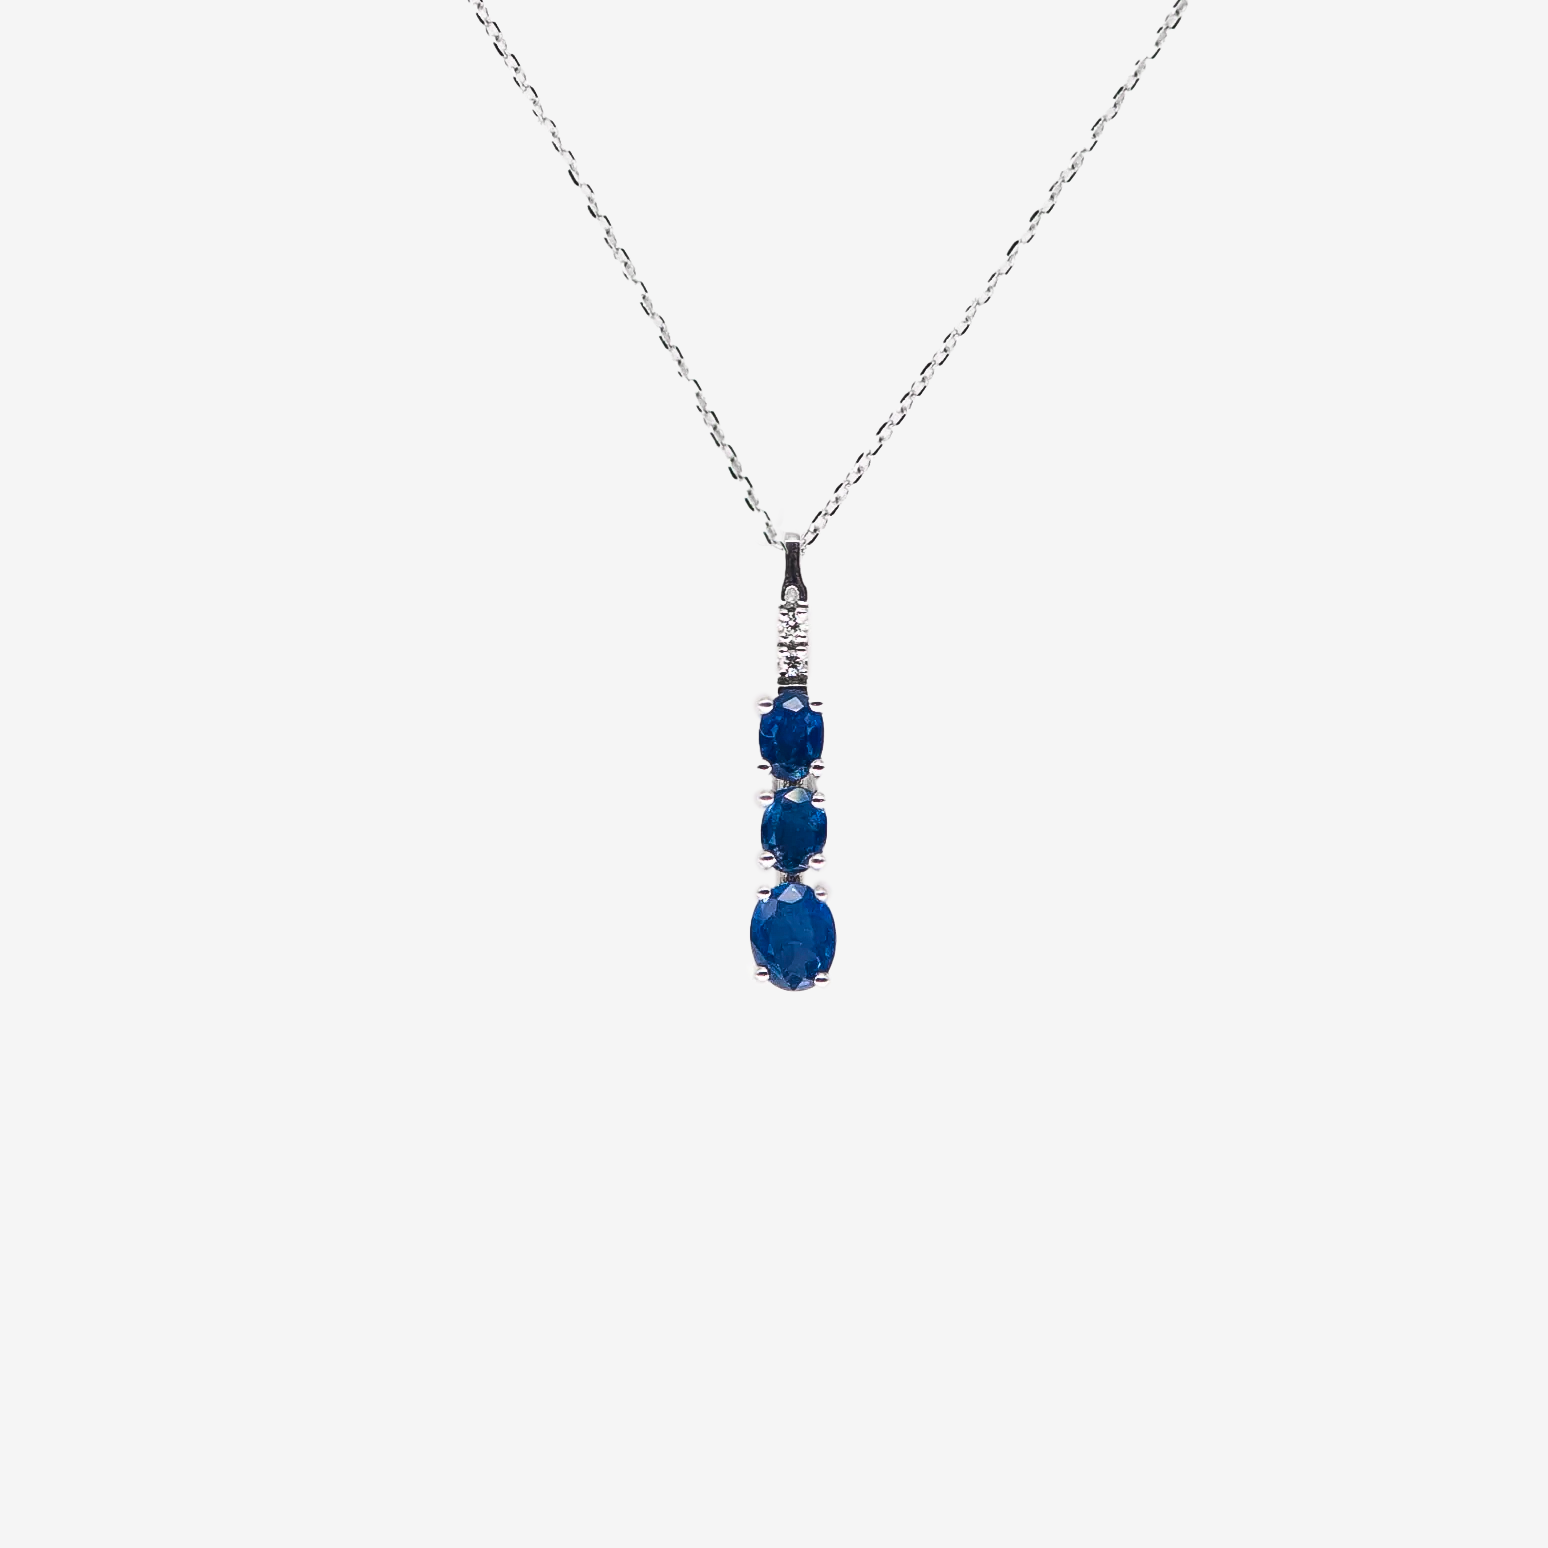 Smooth necklace with sapphires